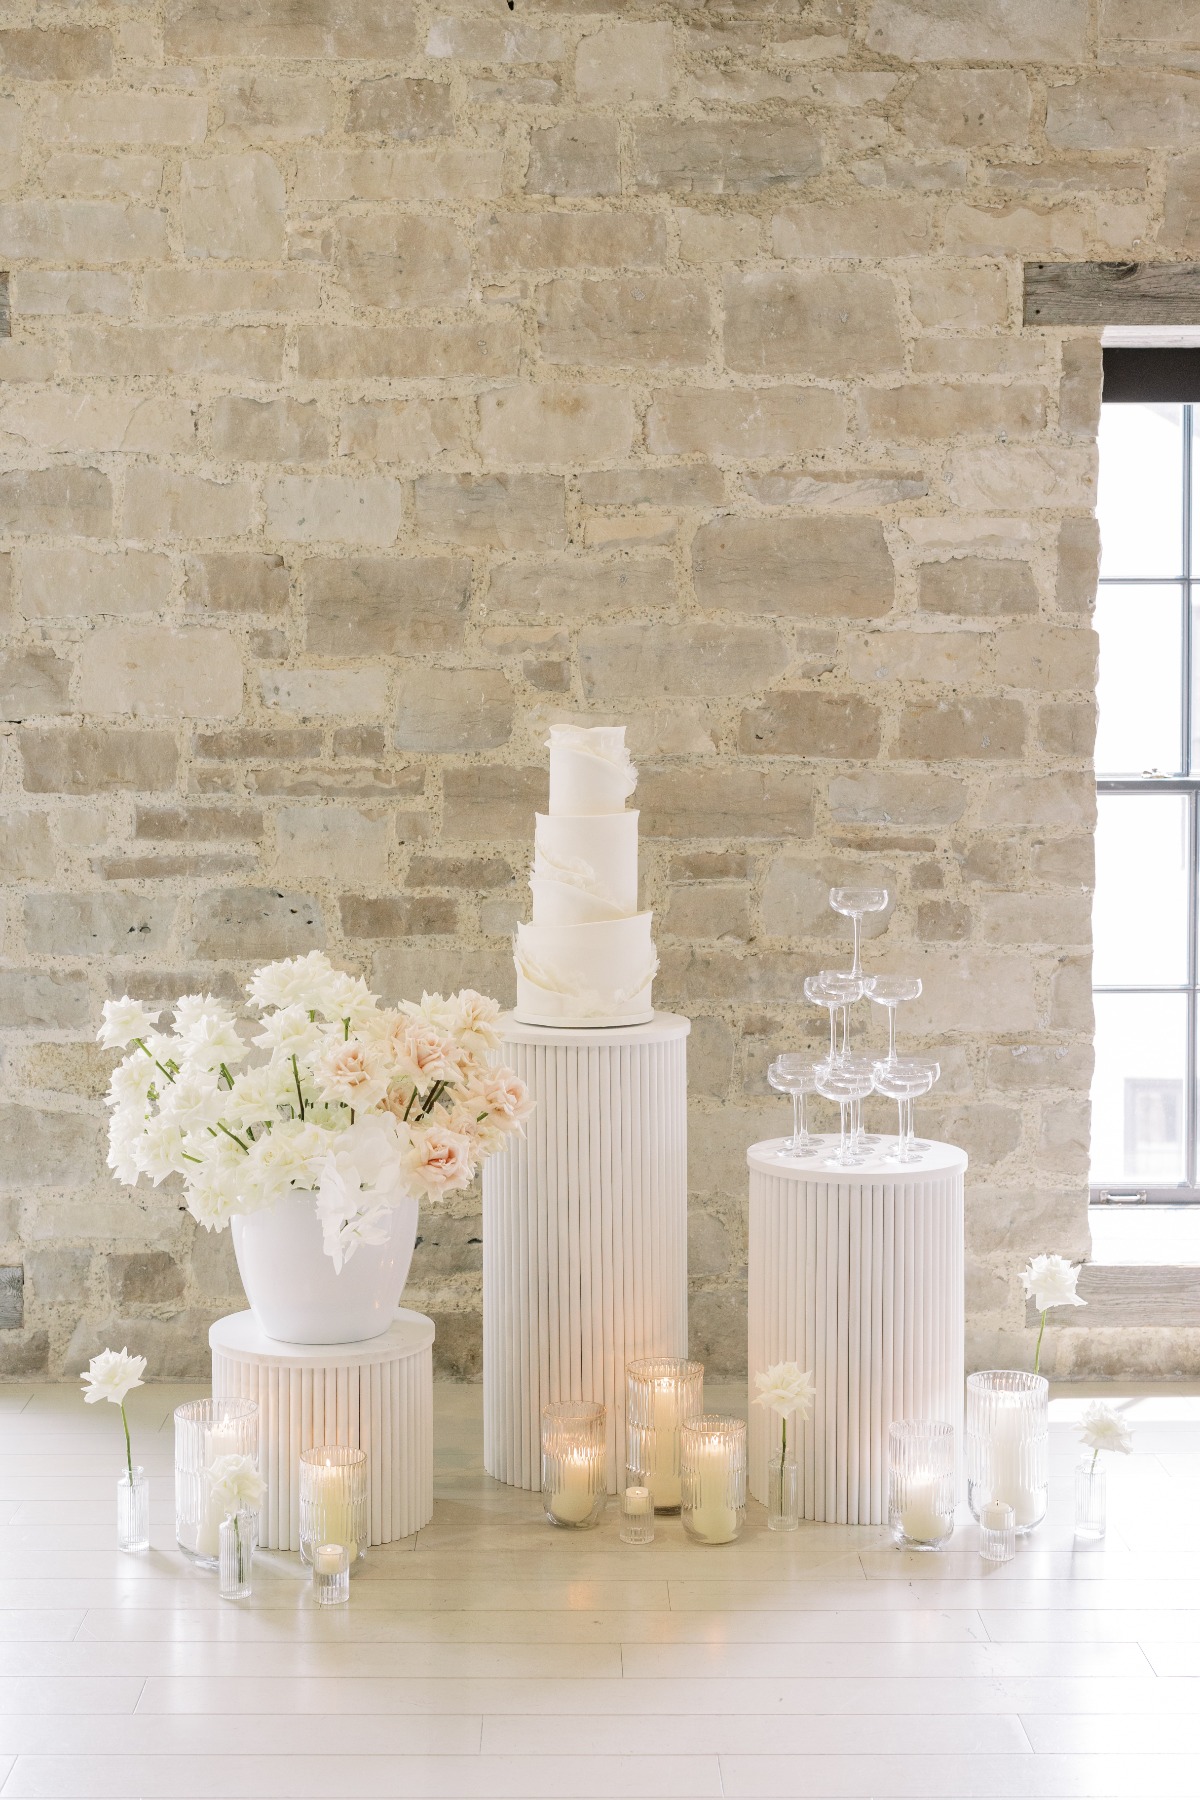 Elegant modern wedding cake table on tall cylindrical stands